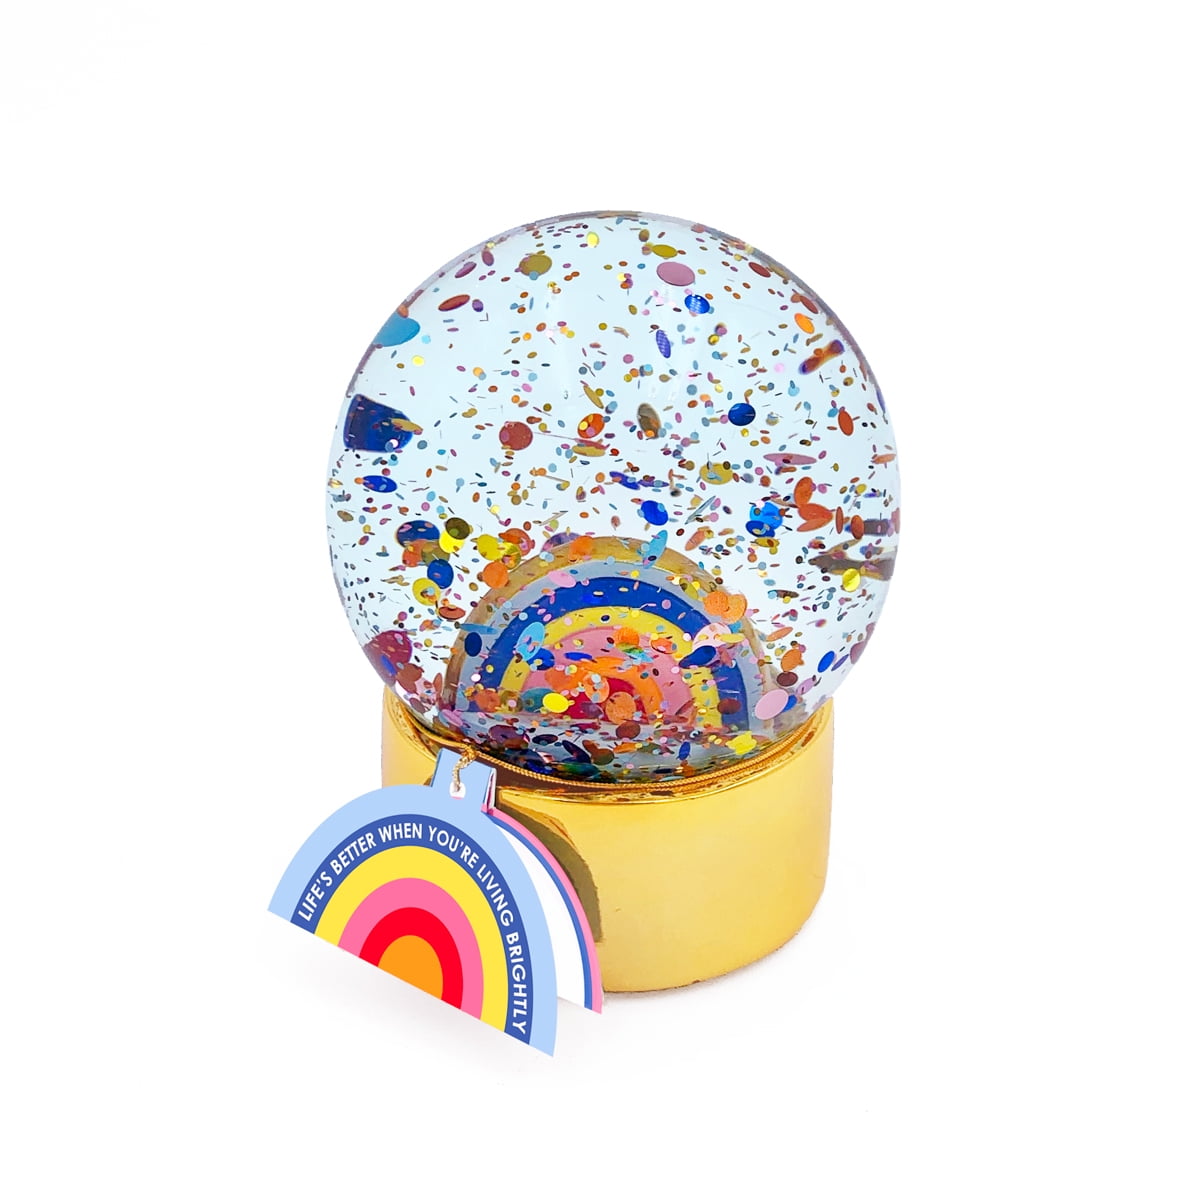 Packed Party 'Living Brightly' Confetti Snow Globe, Party Dcor or Giftable